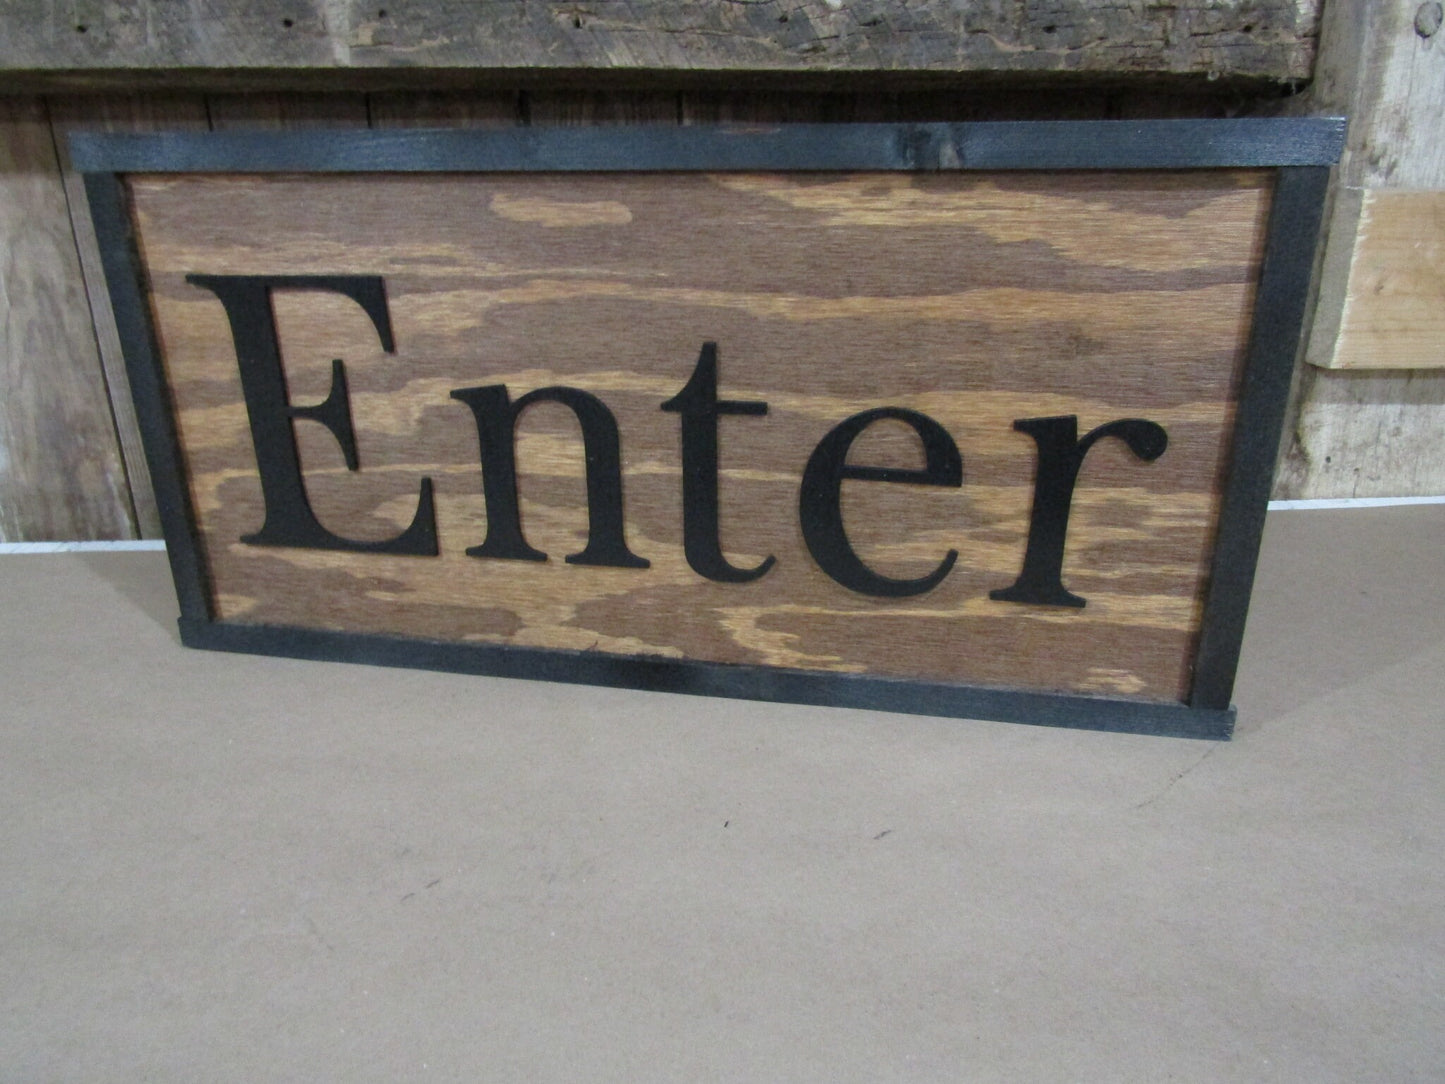 Enter Sign Directional Ranch Sign Company Name Address Signage Commerical Use Oversized Rustic Business Wood Laser Cut Out 3D Handmade